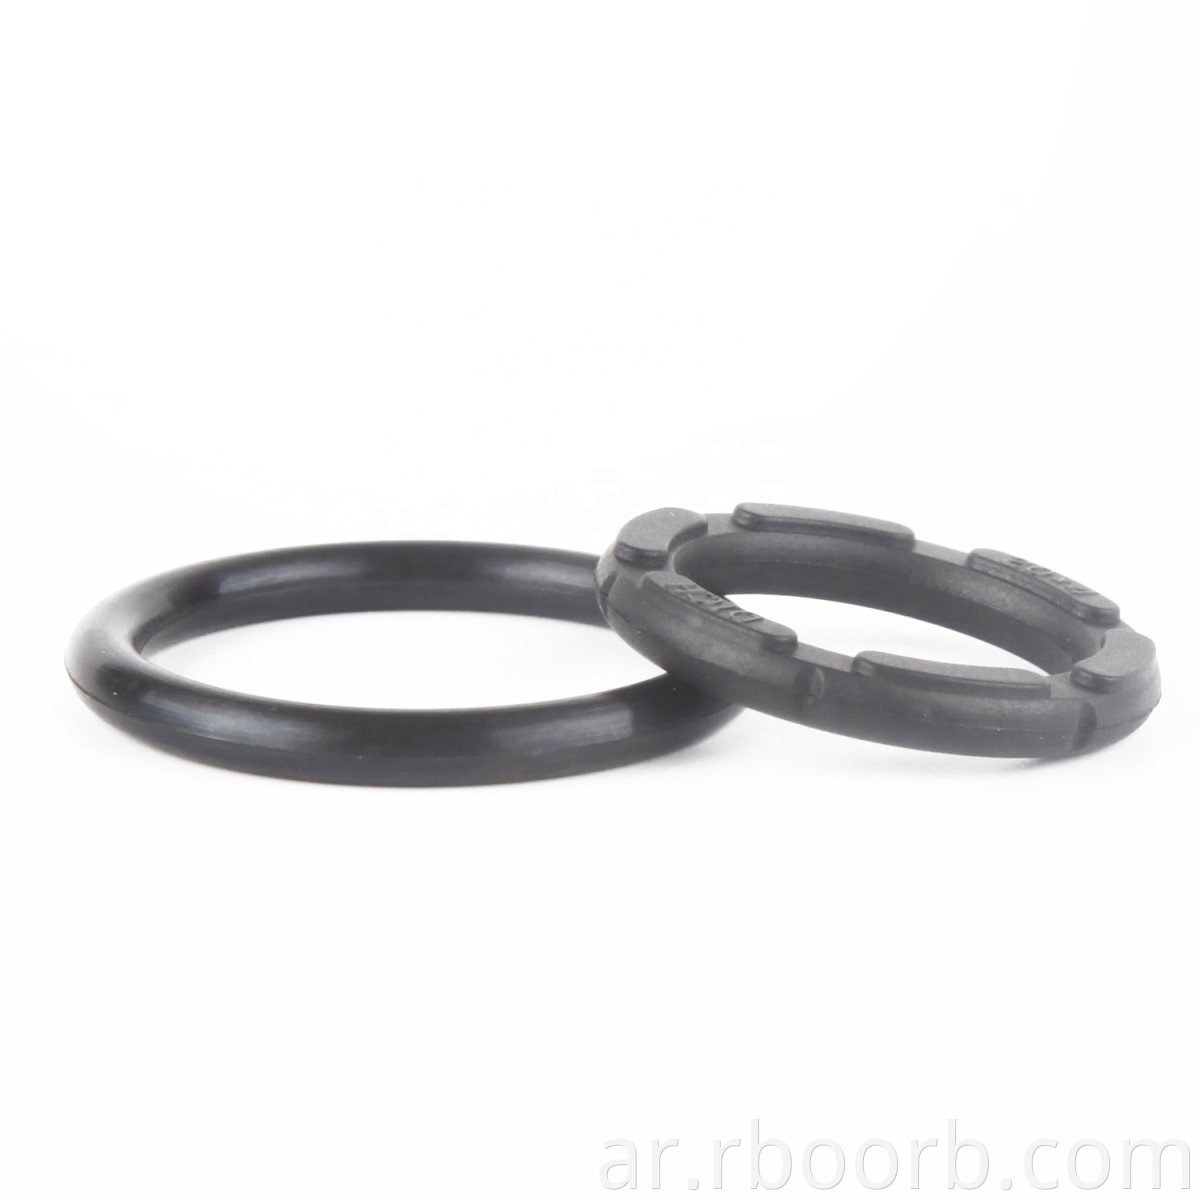 AS568 Standard Factory Price Small Rubber Fkm O Ring Seals